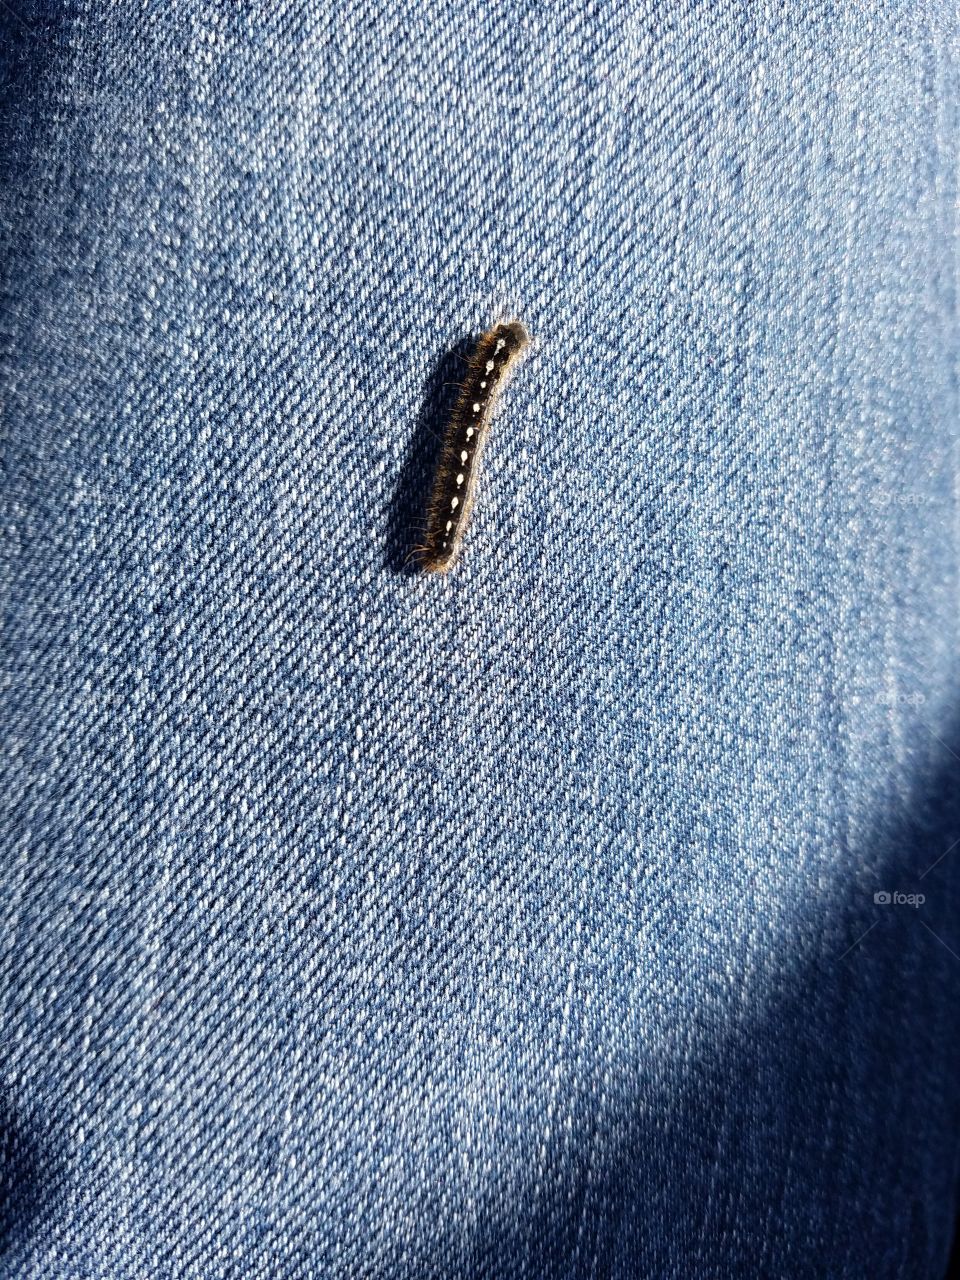 Caterpillar crawling on my jeans